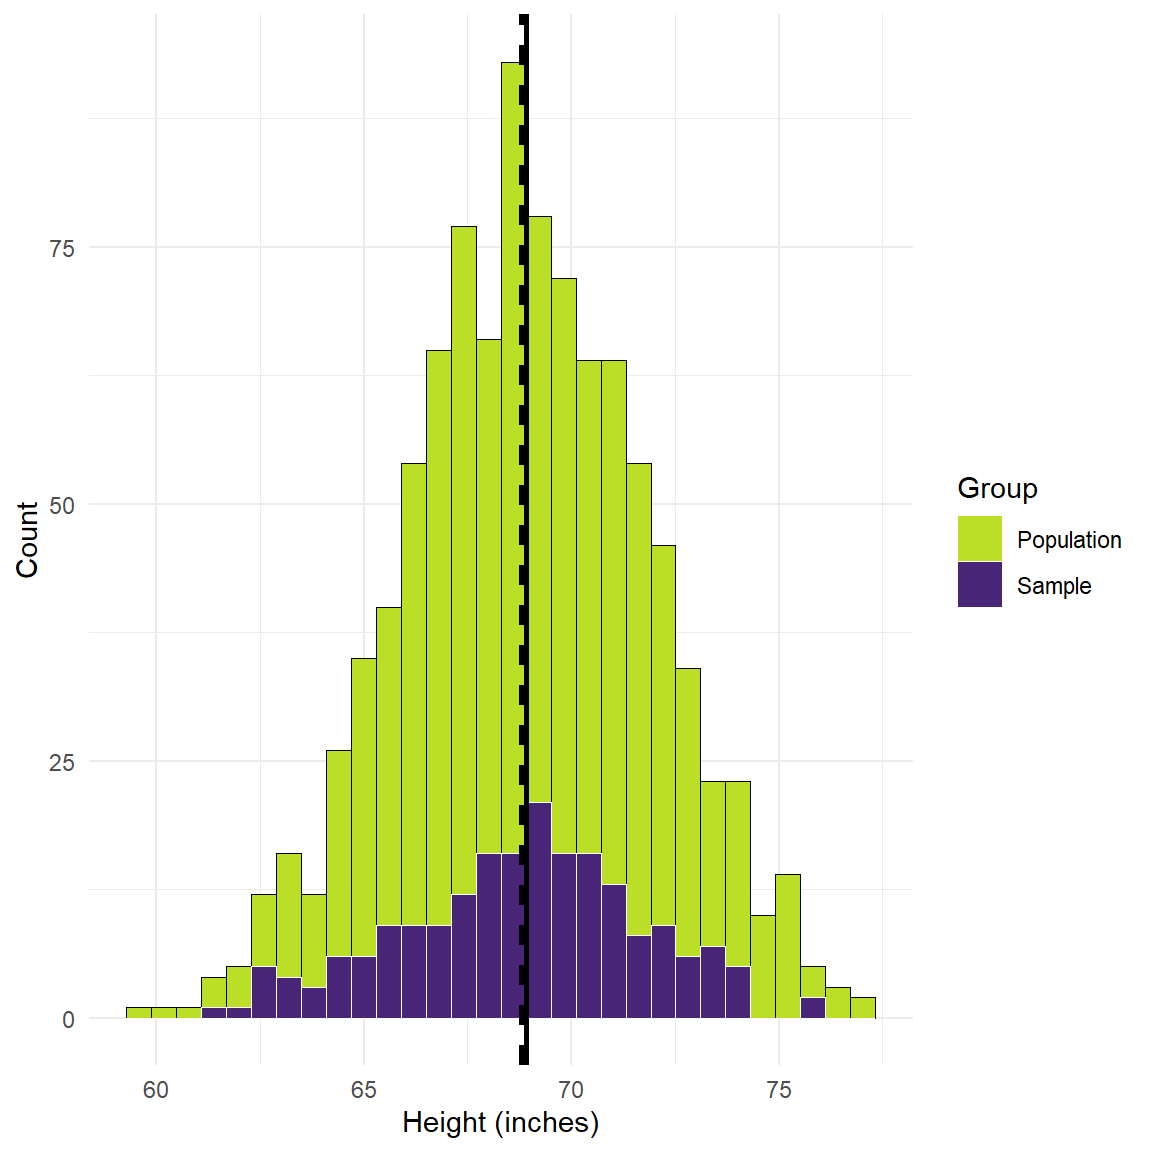 Simulated height values and a sample of 200 individuals